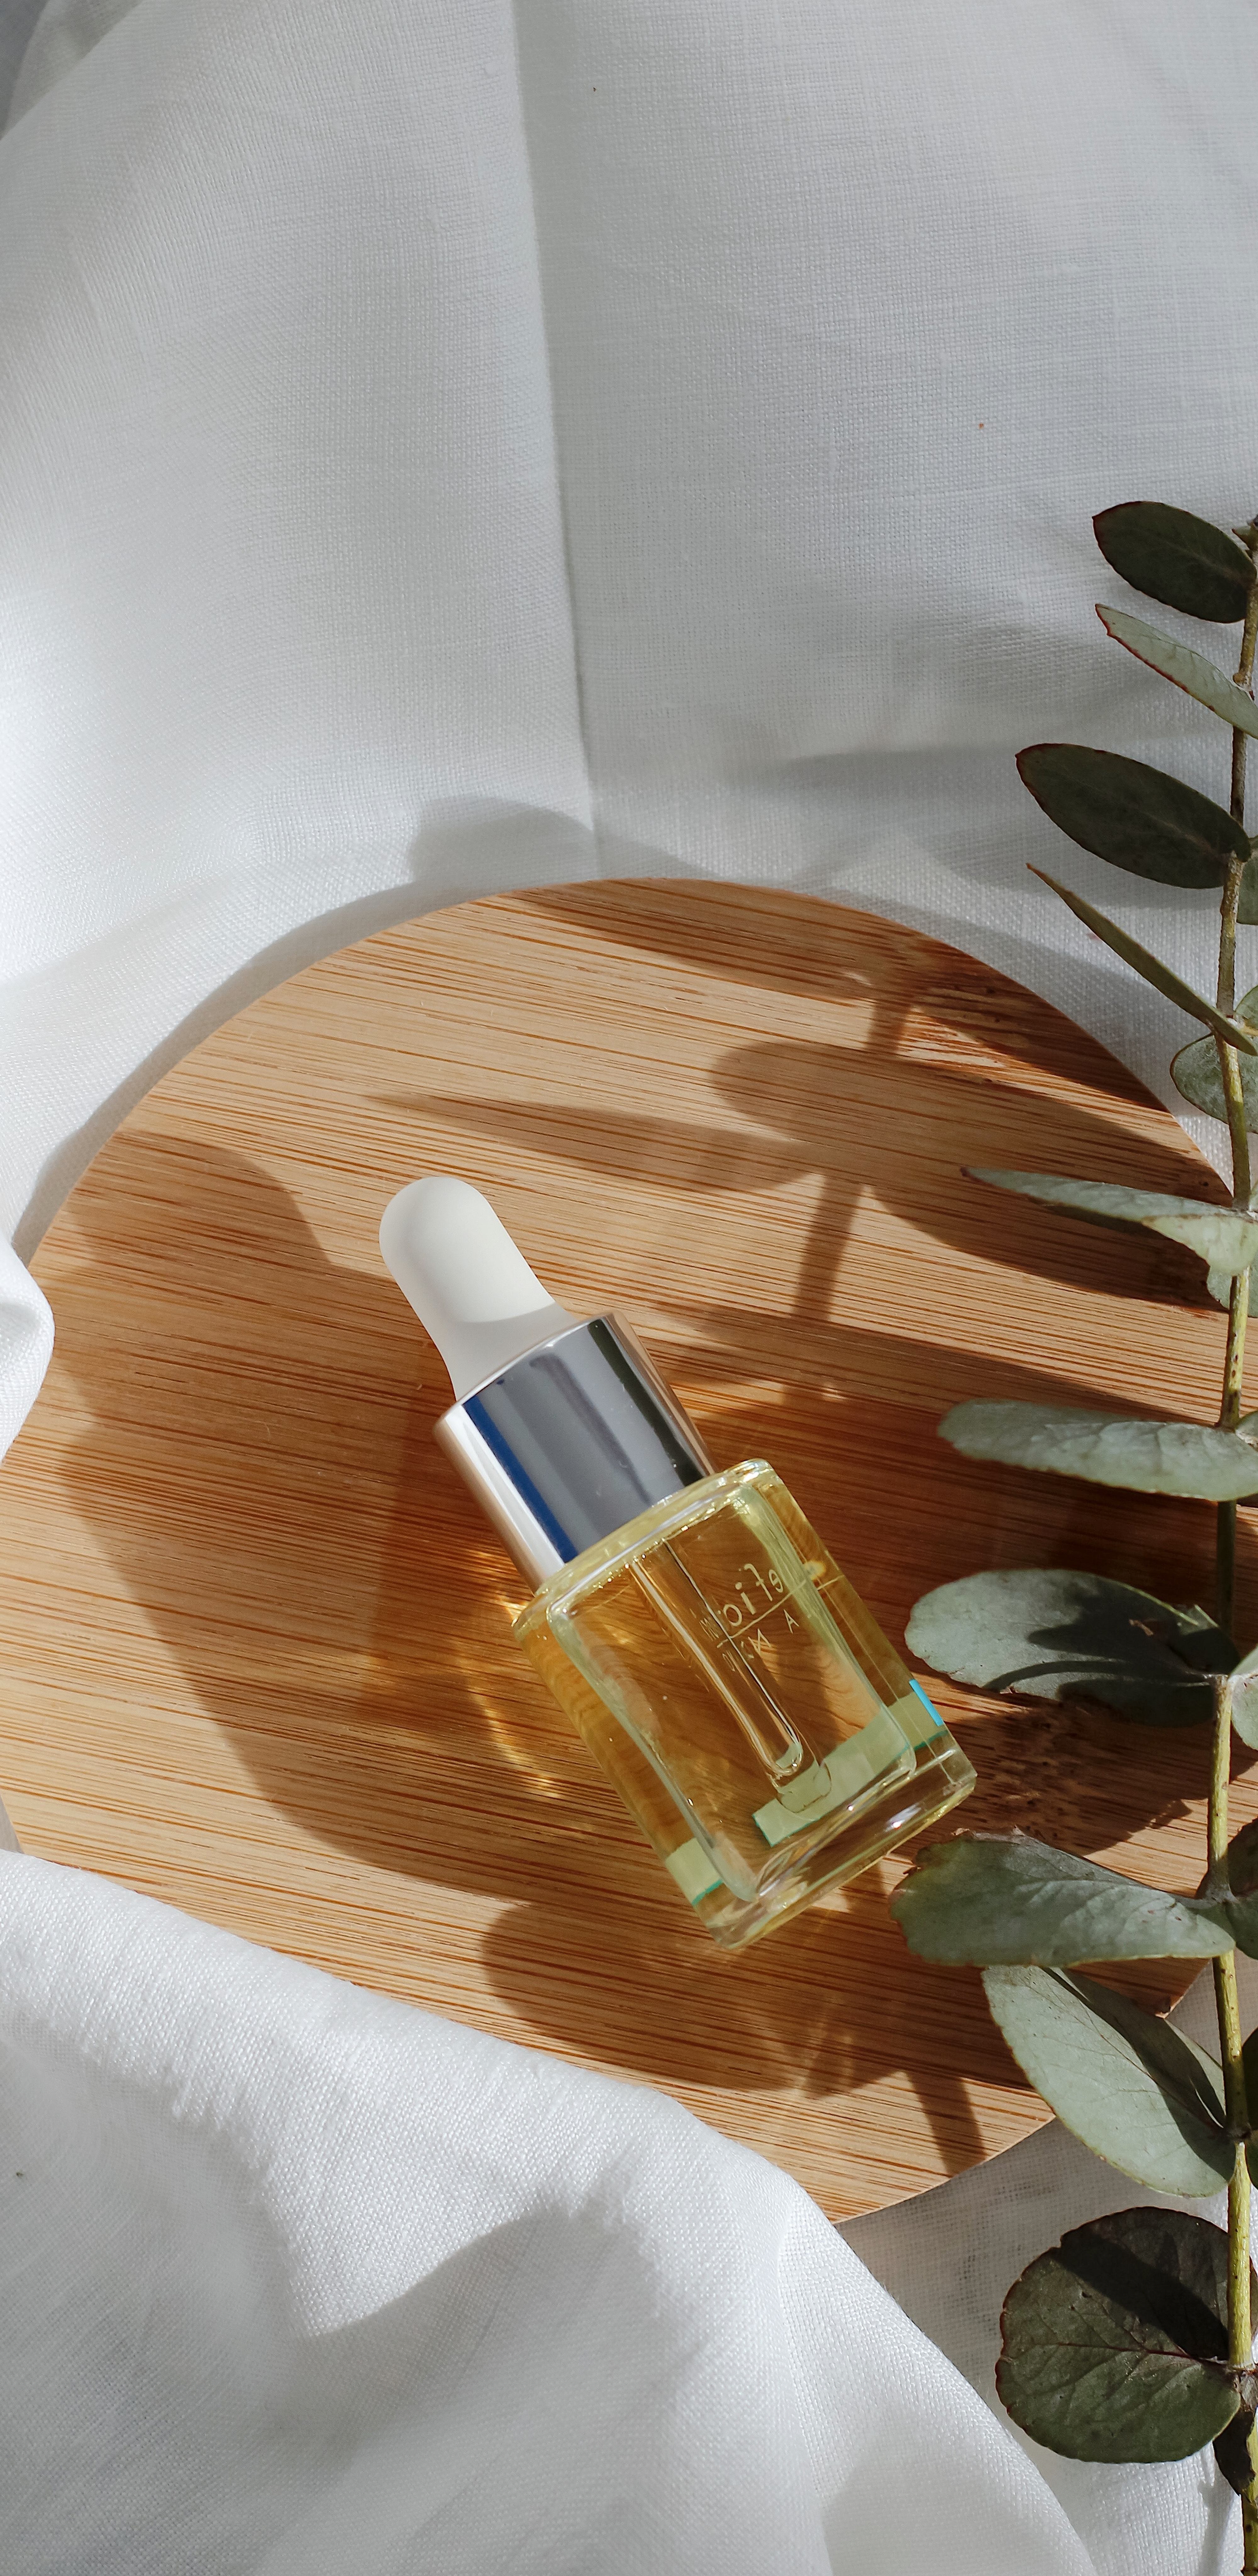 Cosmetics bottle on table with plant